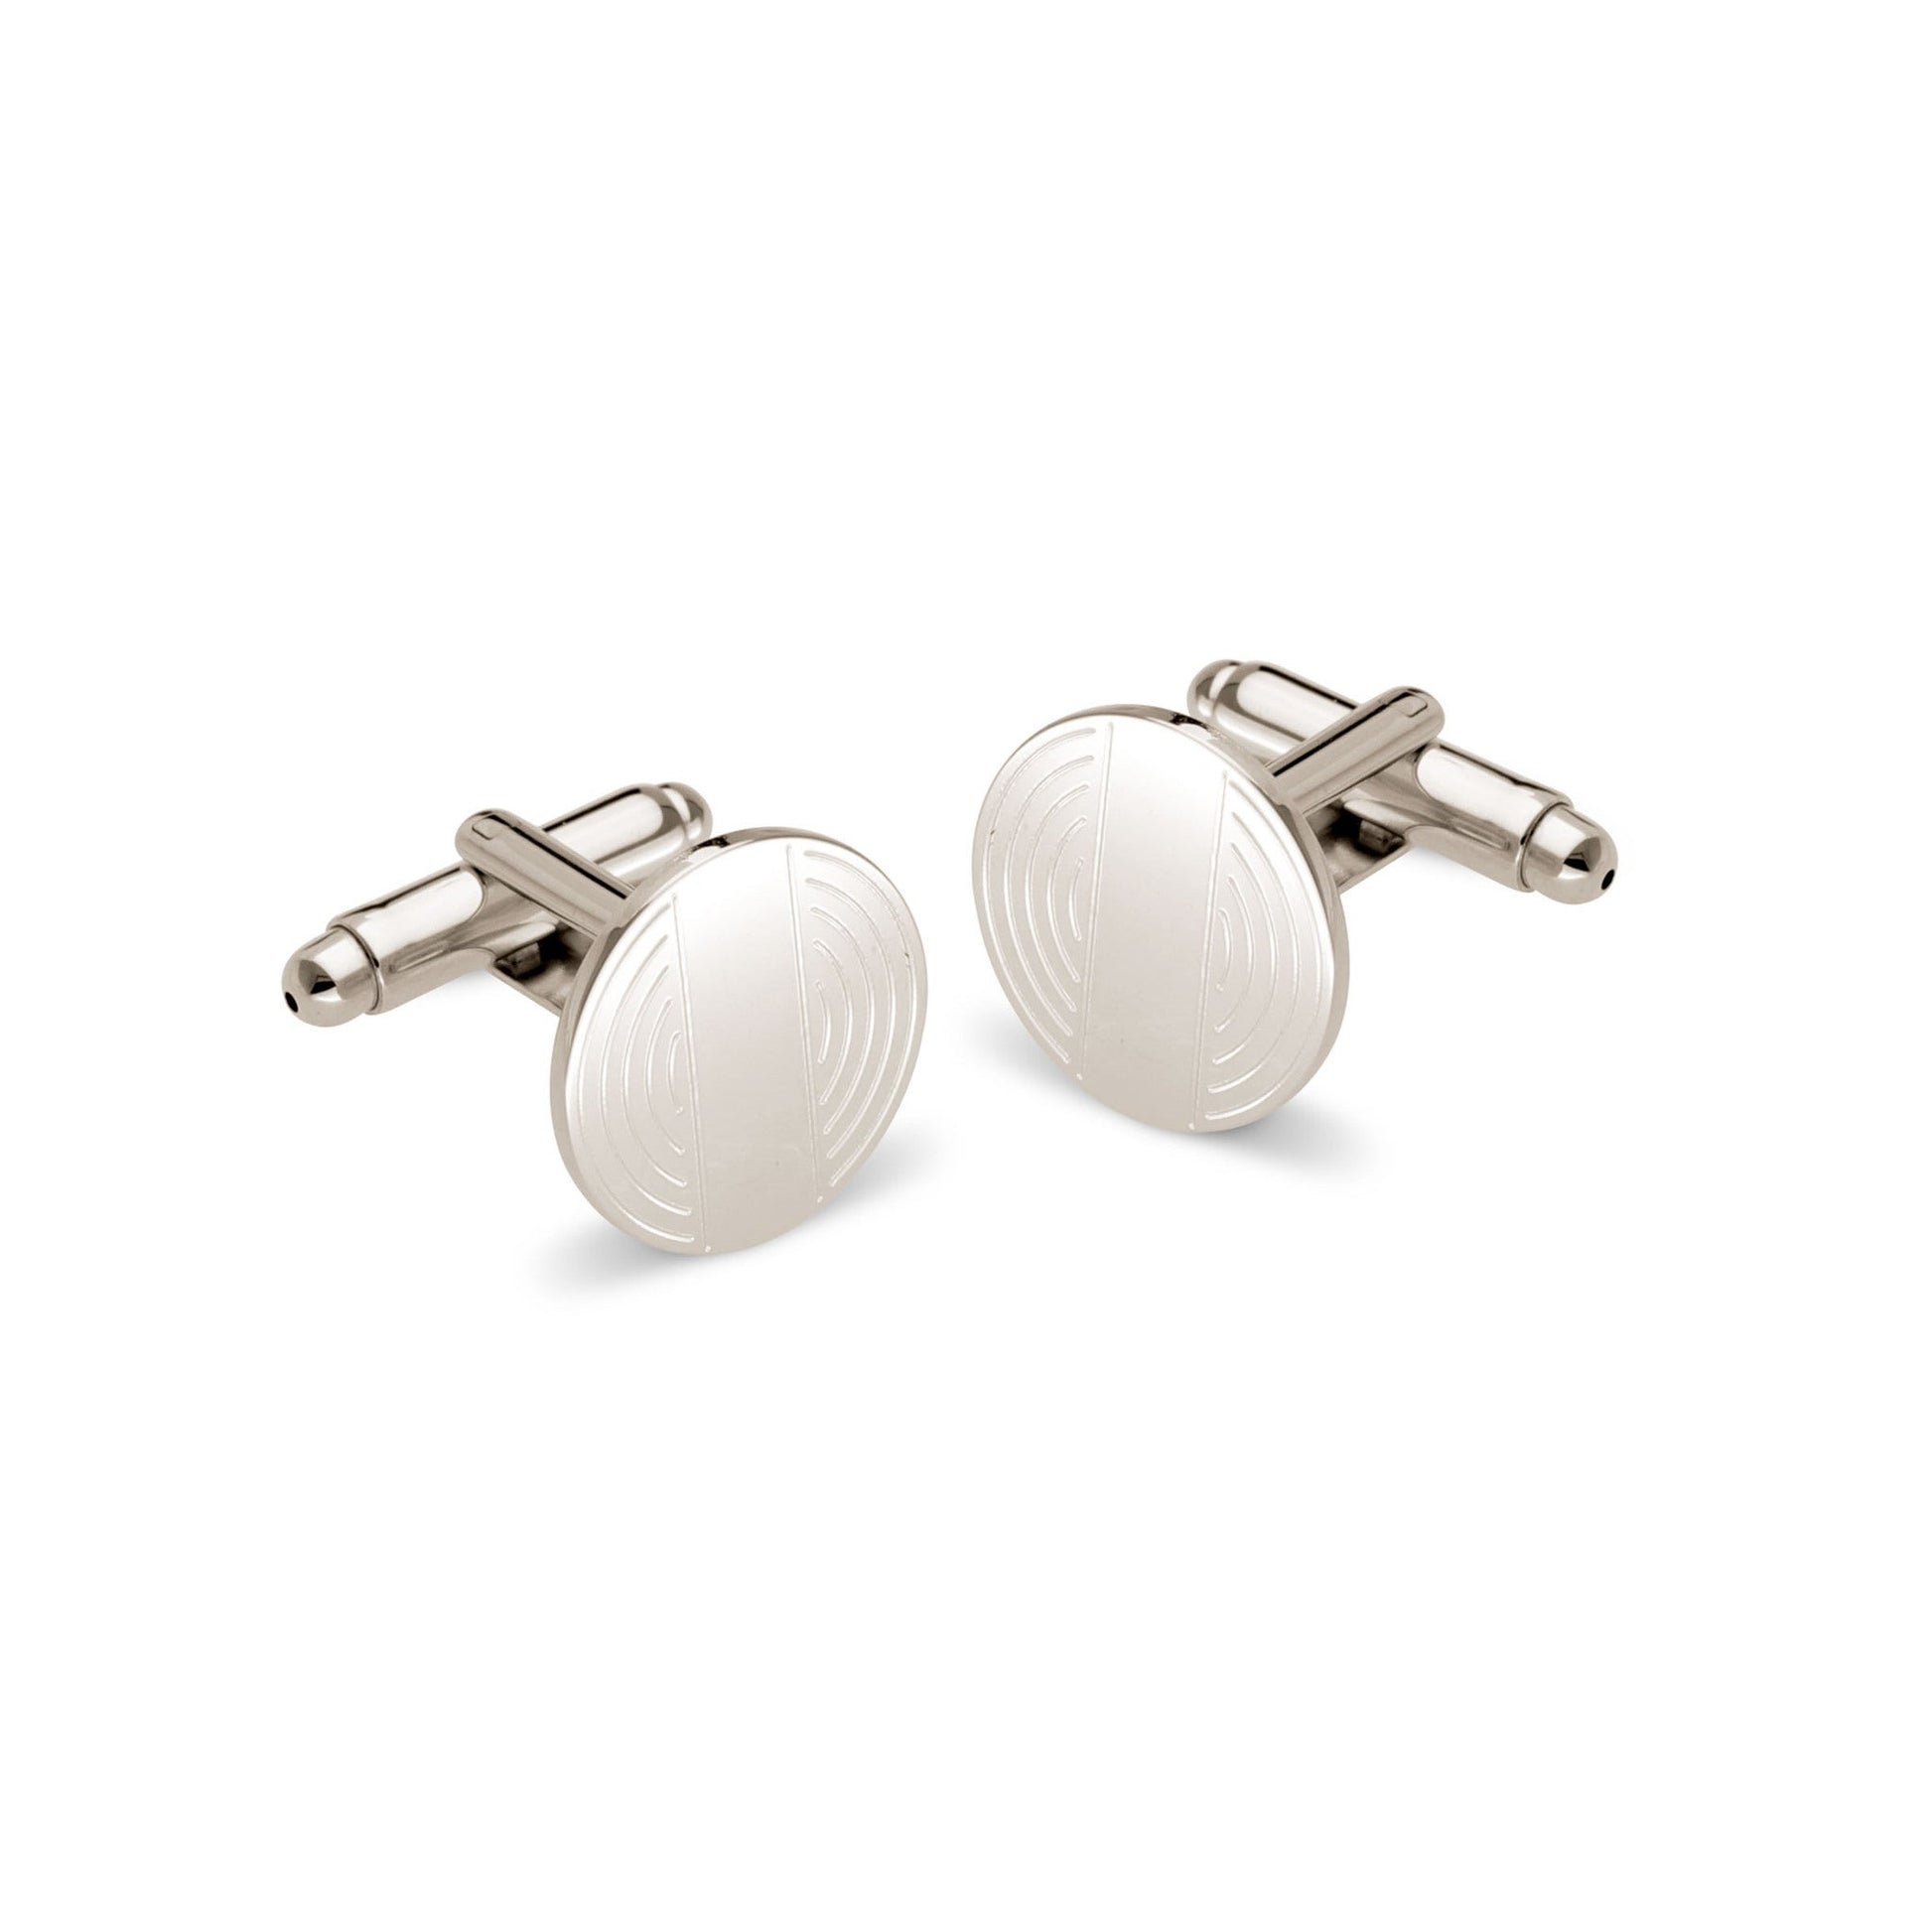 A round cufflinks with half ring engraving displayed on a neutral white background.